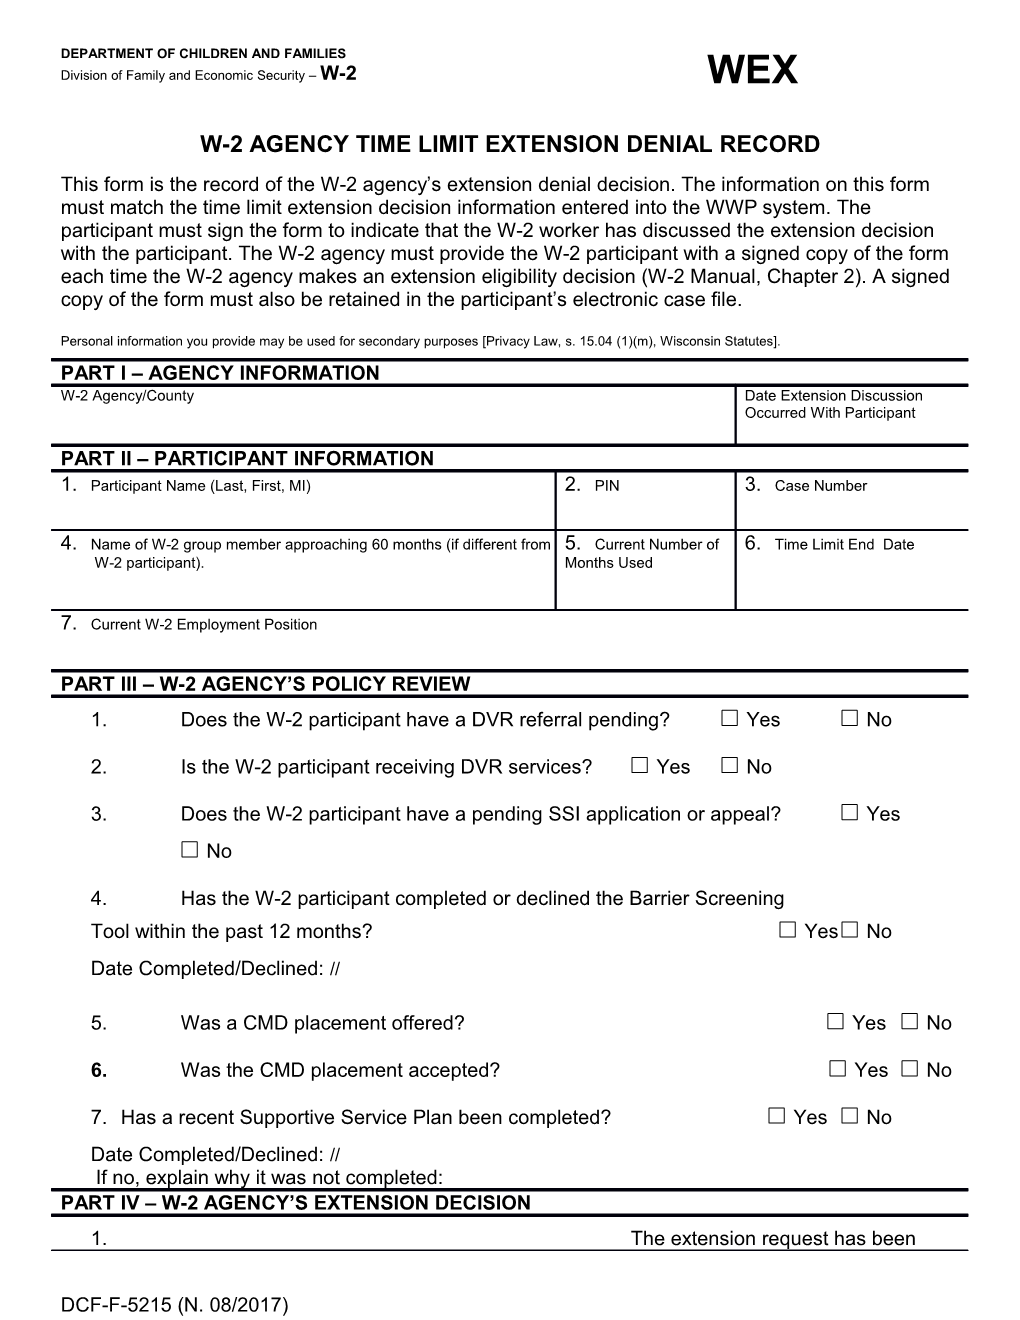 W-2 Agency Time Limit Extension Denial Record